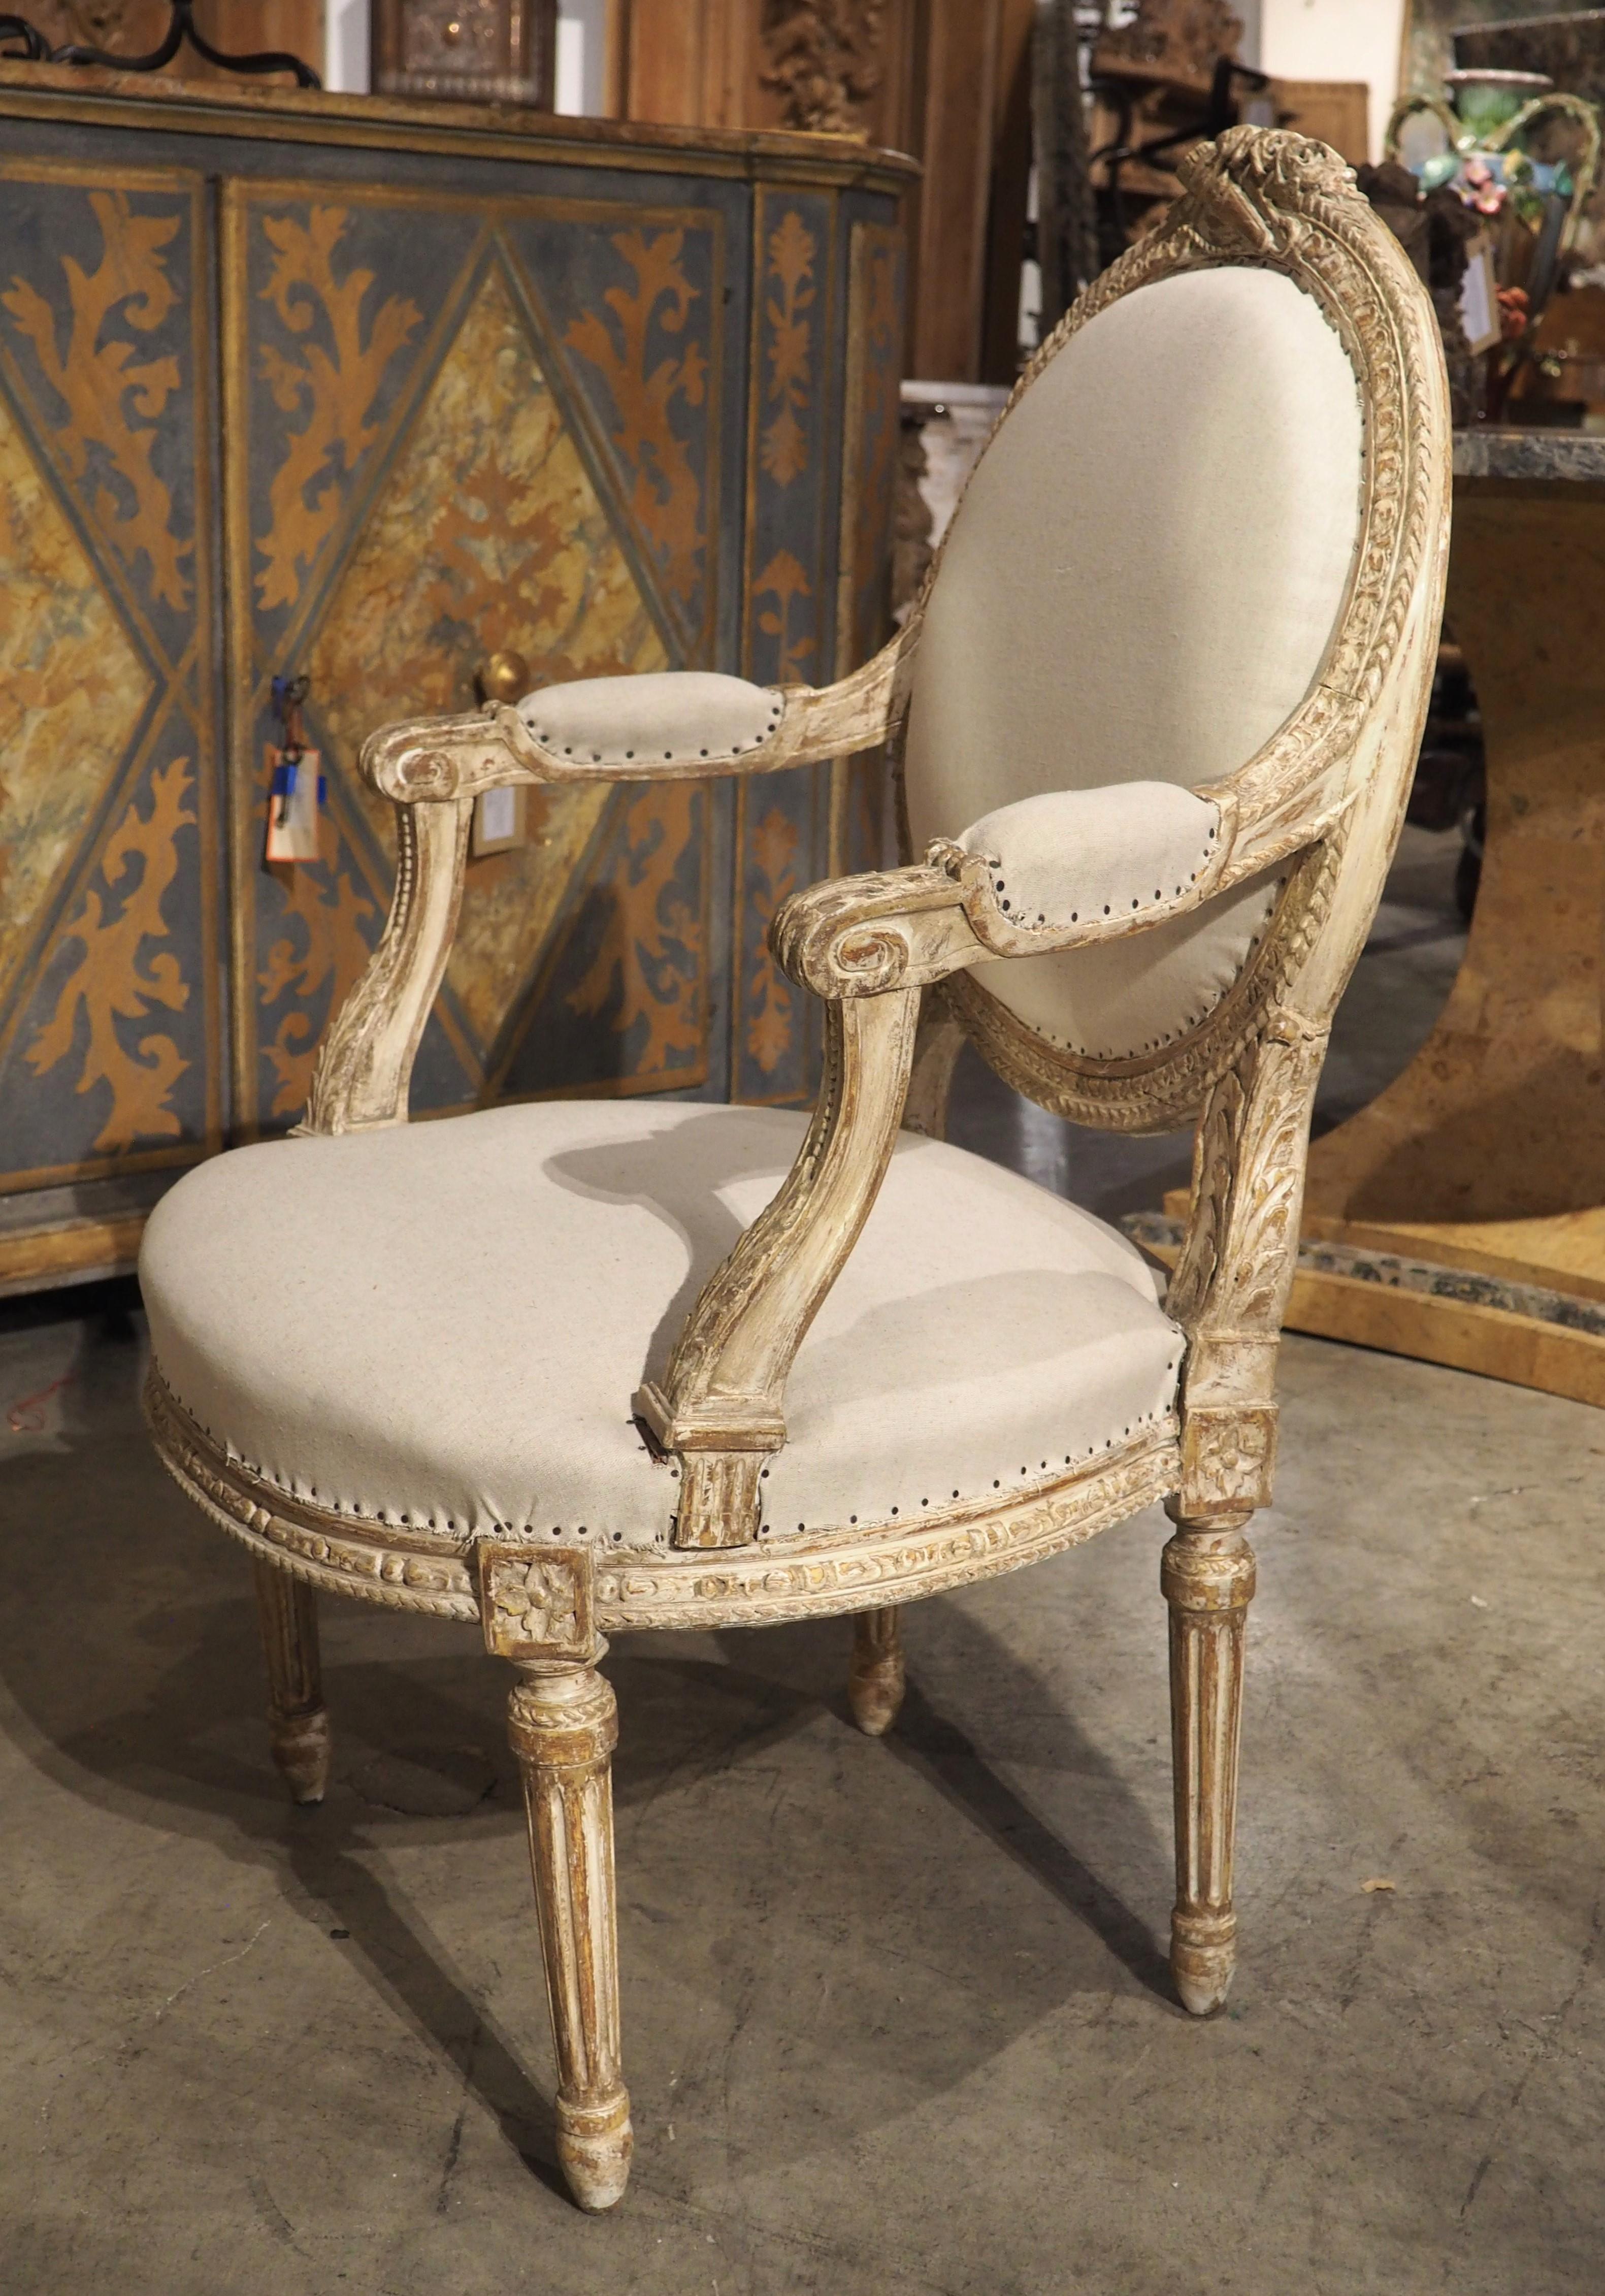 Dating to circa 1885, this set of four hand-carved parcel paint cabriolet armchairs are in the style of Louis XVI. The thick oval medallion backs (which have retained their original checkered canvas on the verso side) have been adorned with a trophy